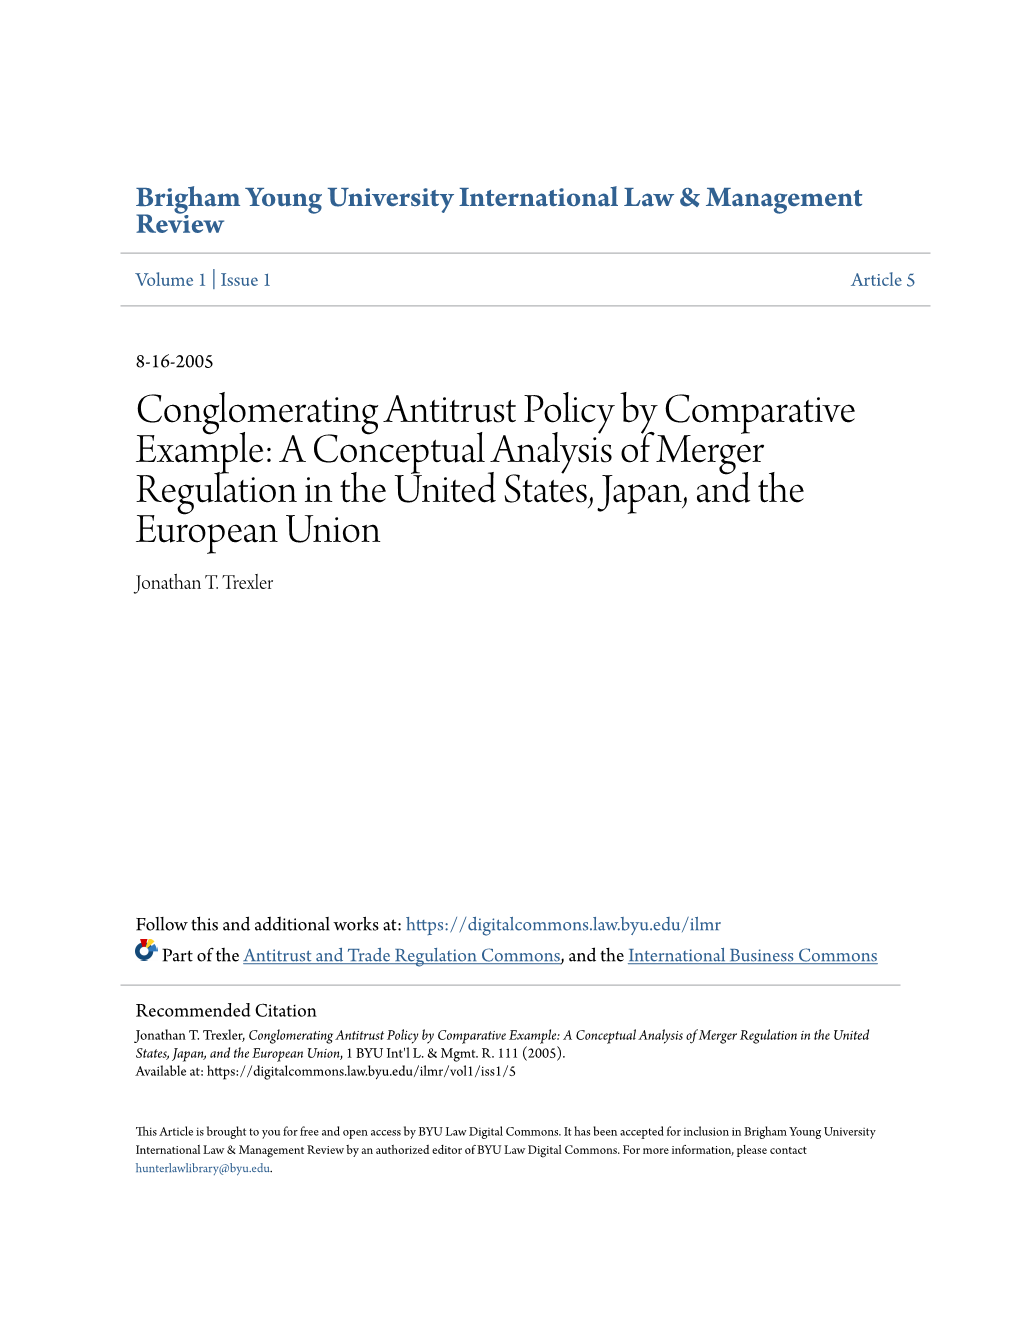 A Conceptual Analysis of Merger Regulation in the United States, Japan, and the European Union Jonathan T